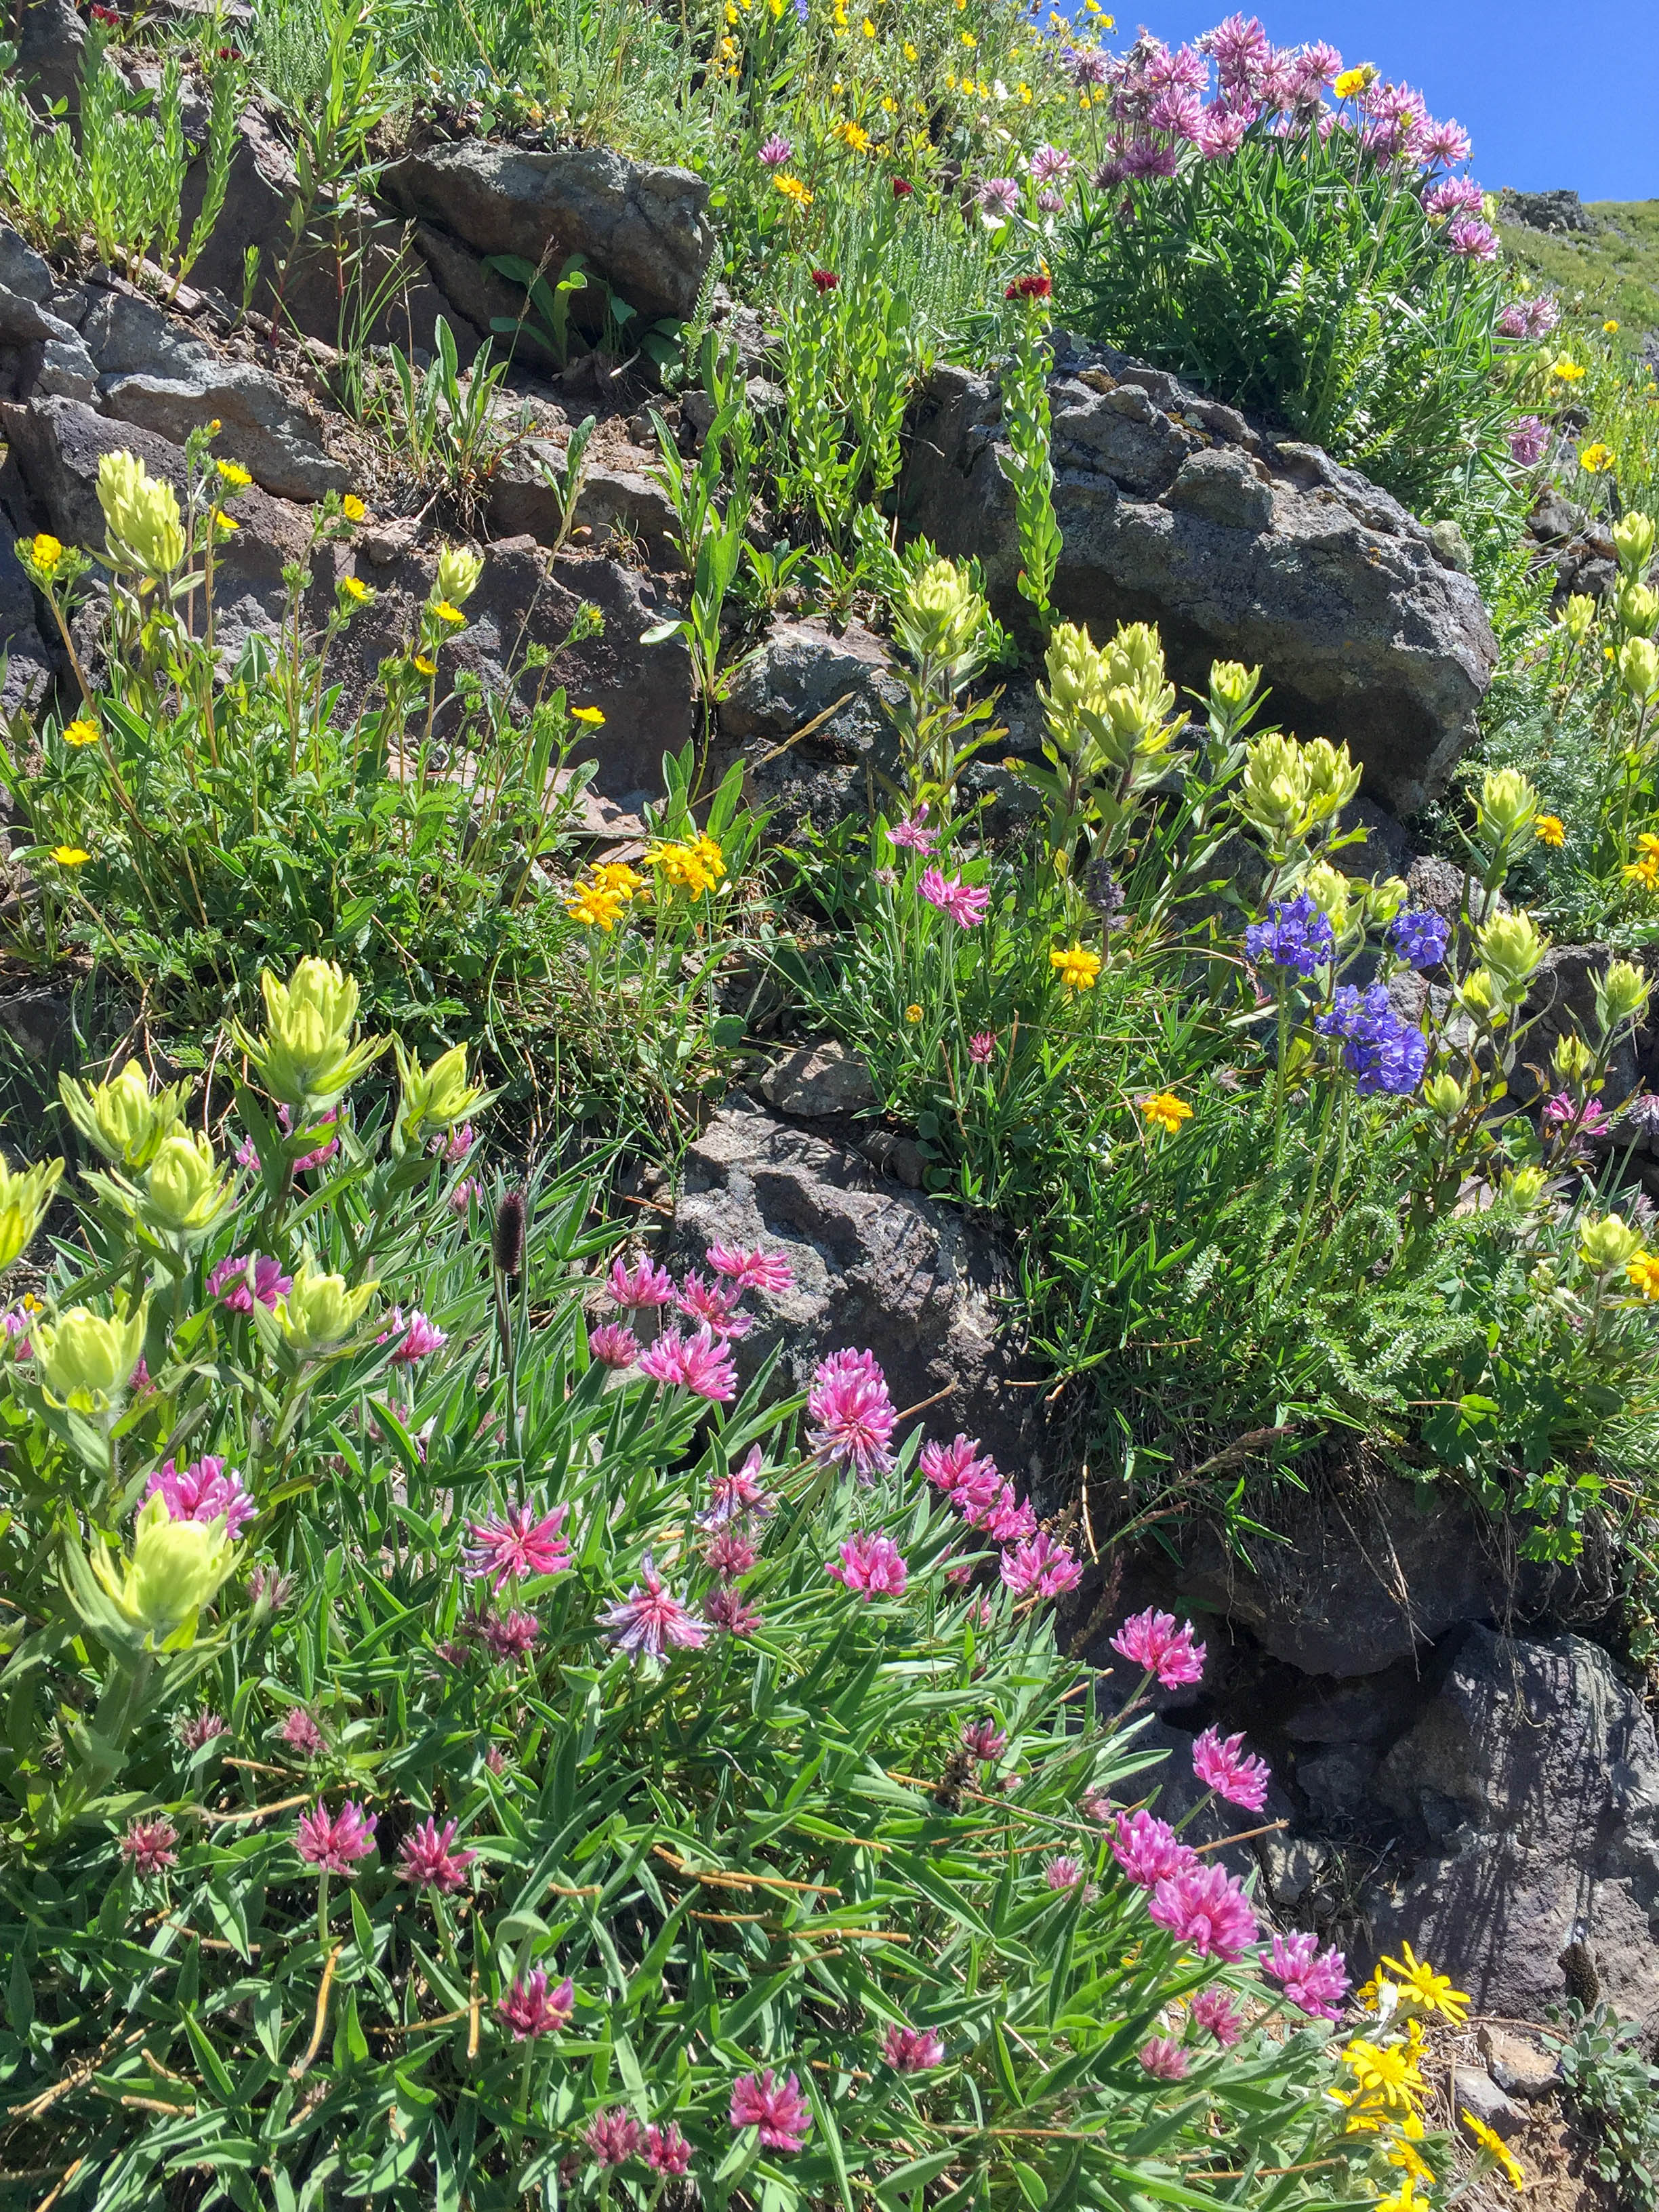 Wildflowers near the narrow ledge of the trail